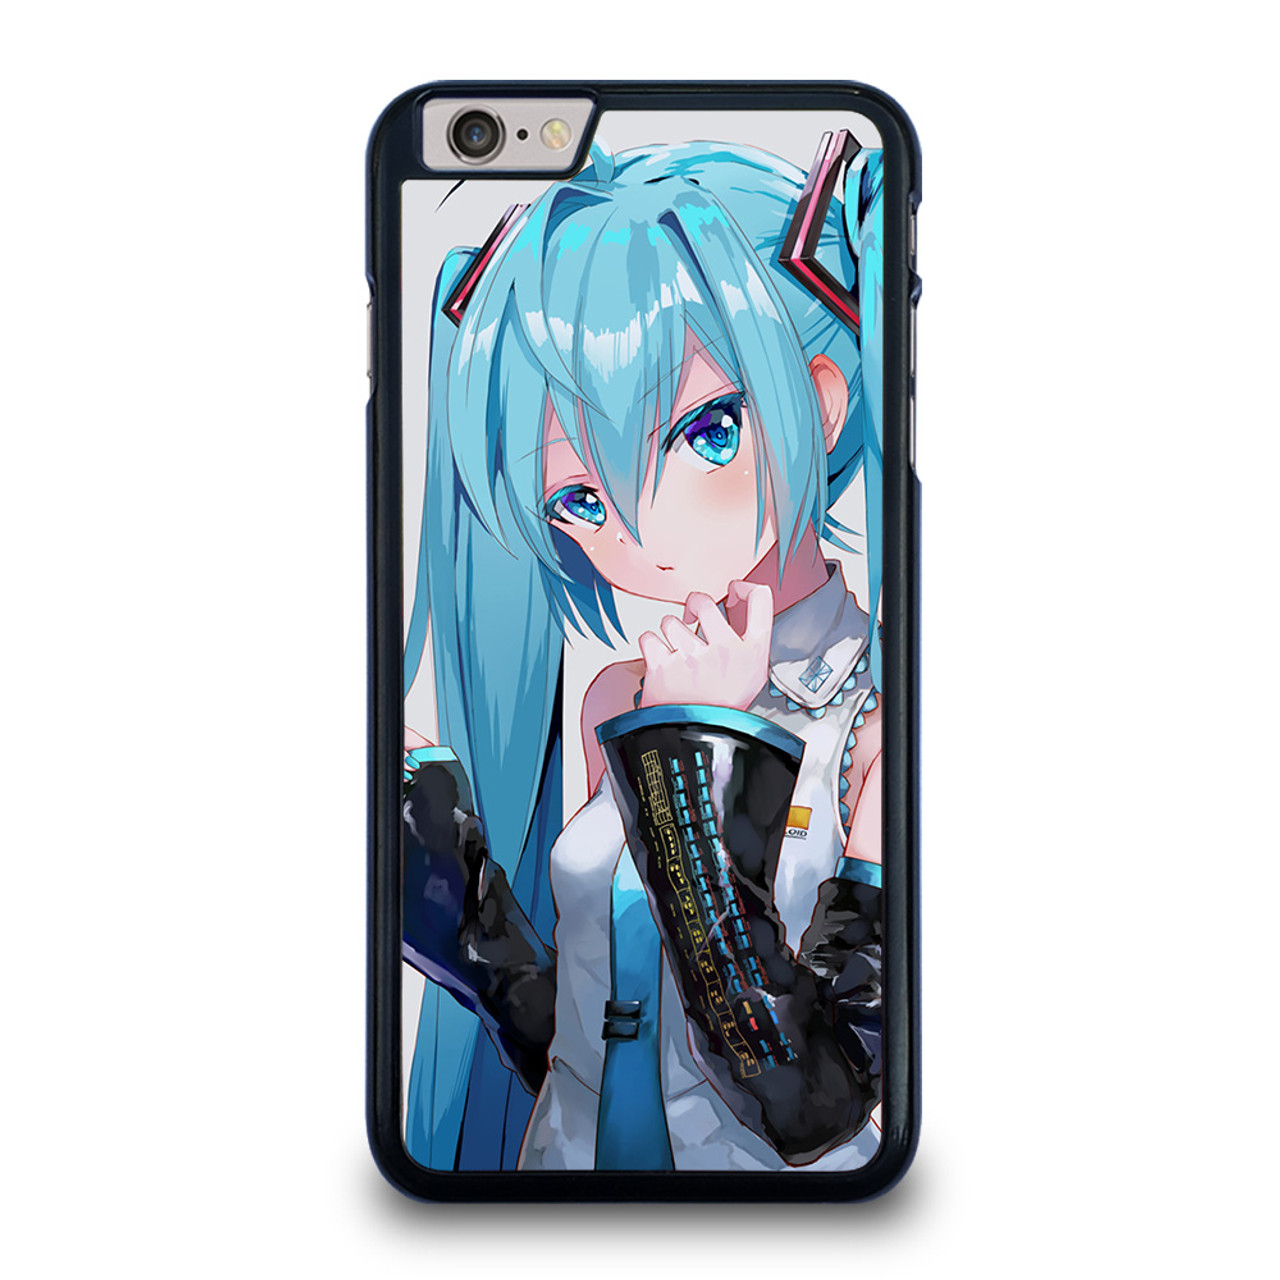 VOCALOID ANIME iPhone 6 / 6S Cover